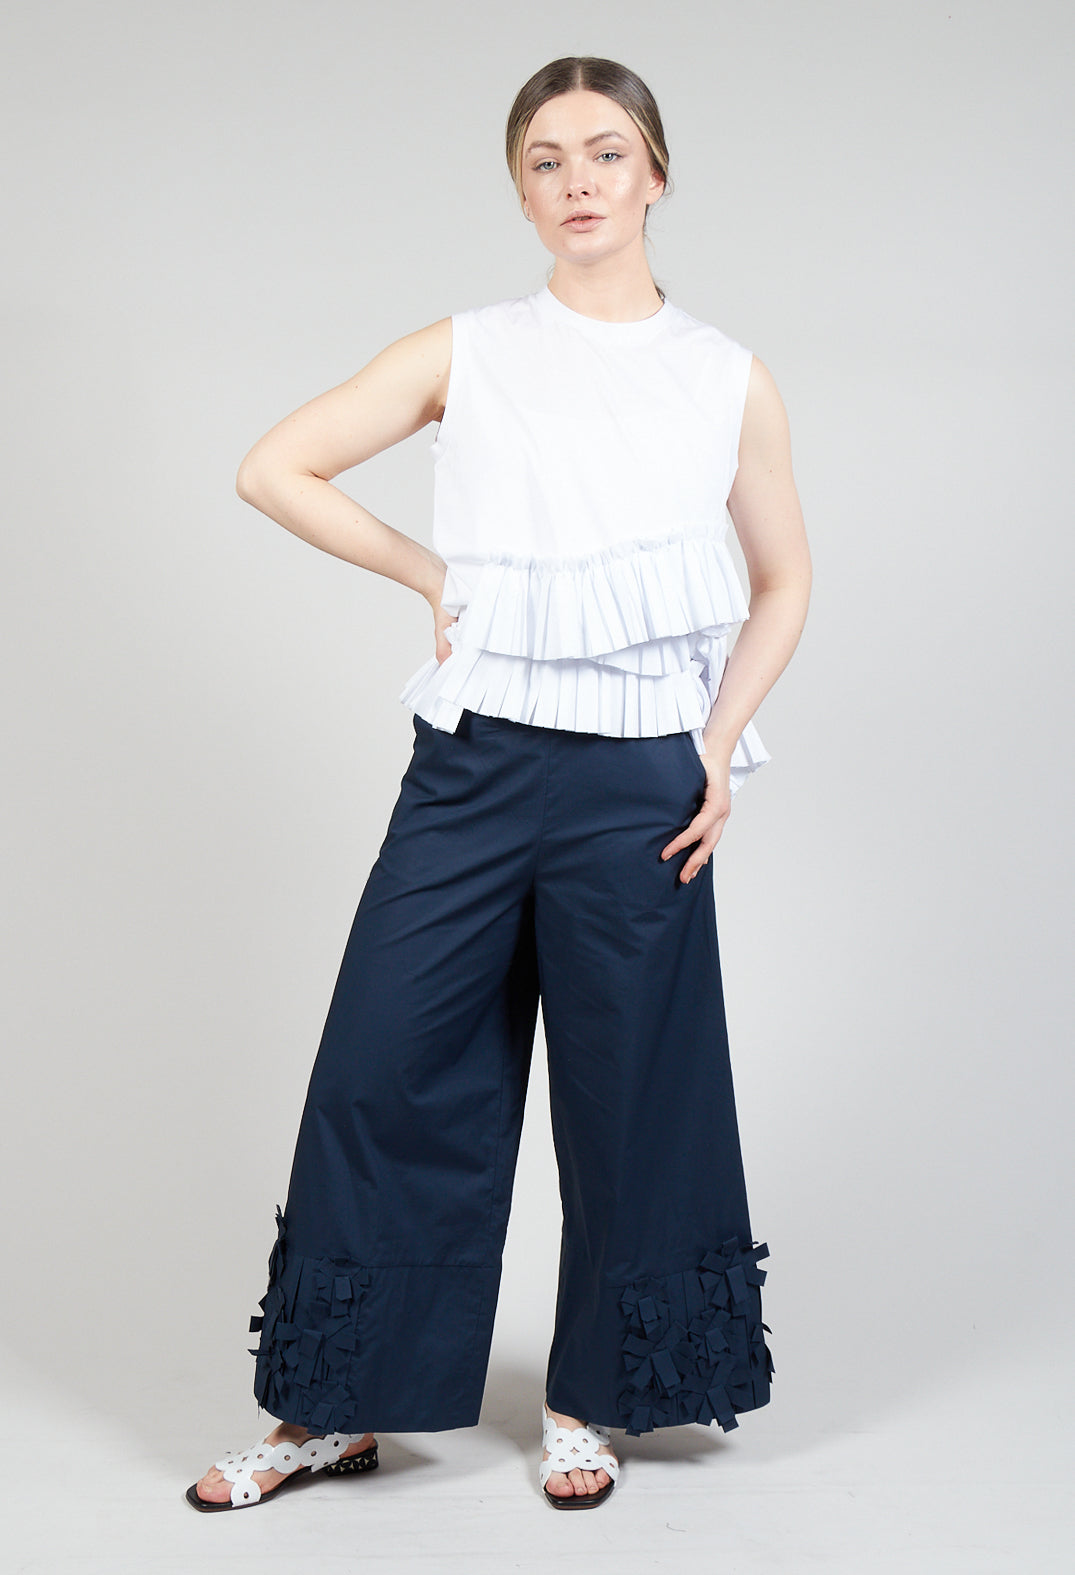 Fabric Embellished Hemmed Trousers in Navy